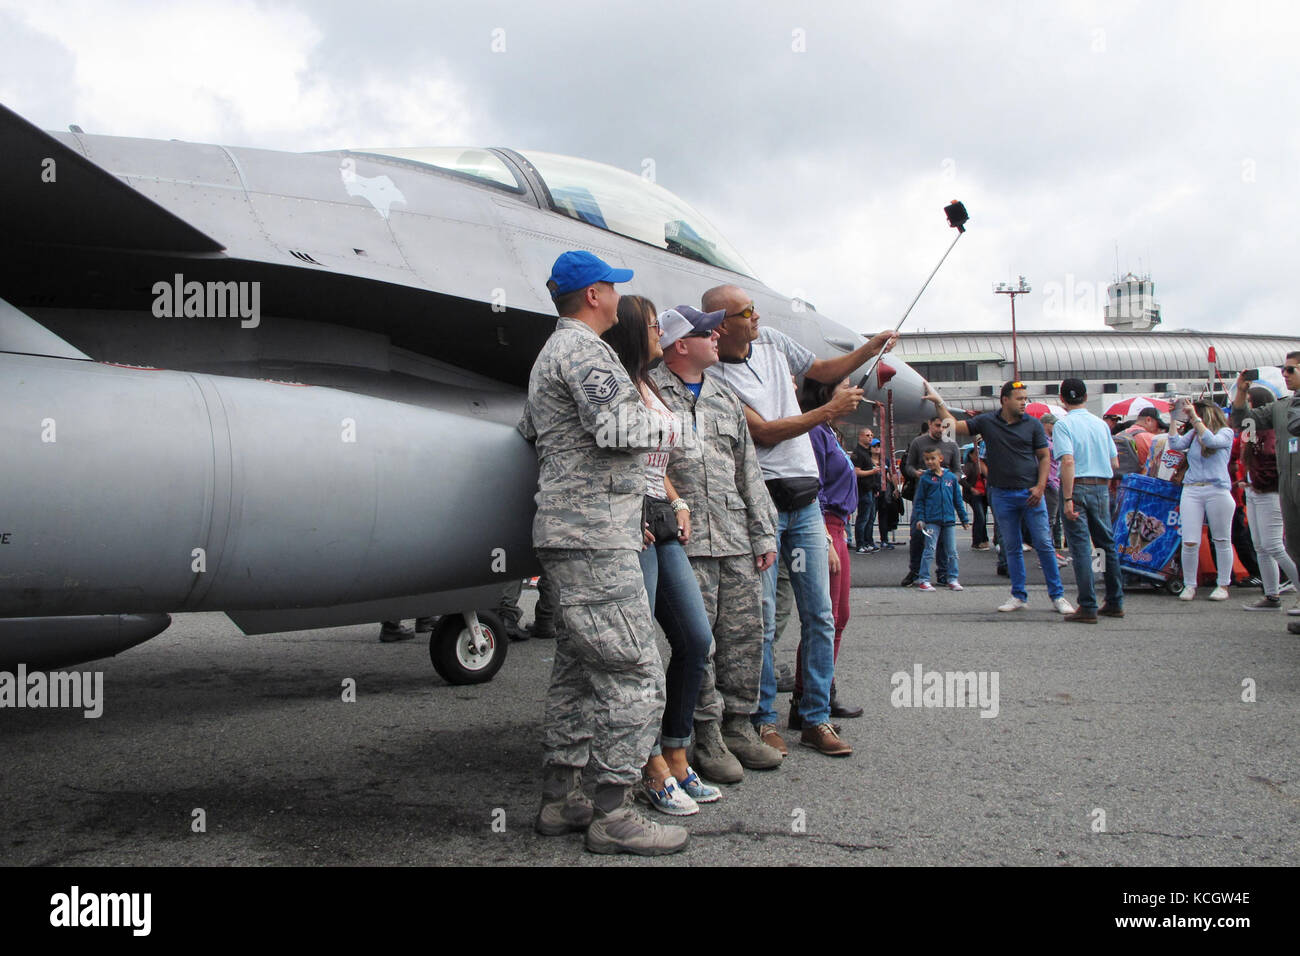 U.S. Air Force Master Sgt. Jeff Hopper and John Bonovich, both assigned to the South Carolina Air National Guard’s 169th Aircraft Maintenance Squadron, take a selfie with visitors to the Colombian Air Force’s Feria Aeronautica Internaccional – Colombia in Rionegro,  July 15, 2017. The South Carolina Air National Guard is supporting its State Partner with providing two F-16s to the air show at Rionegro, Antioquia, Colombia from July 13-16, 2017. The United States military participation in the air show provides an opportunity to strengthen our military-to-military relationships with regional par Stock Photo